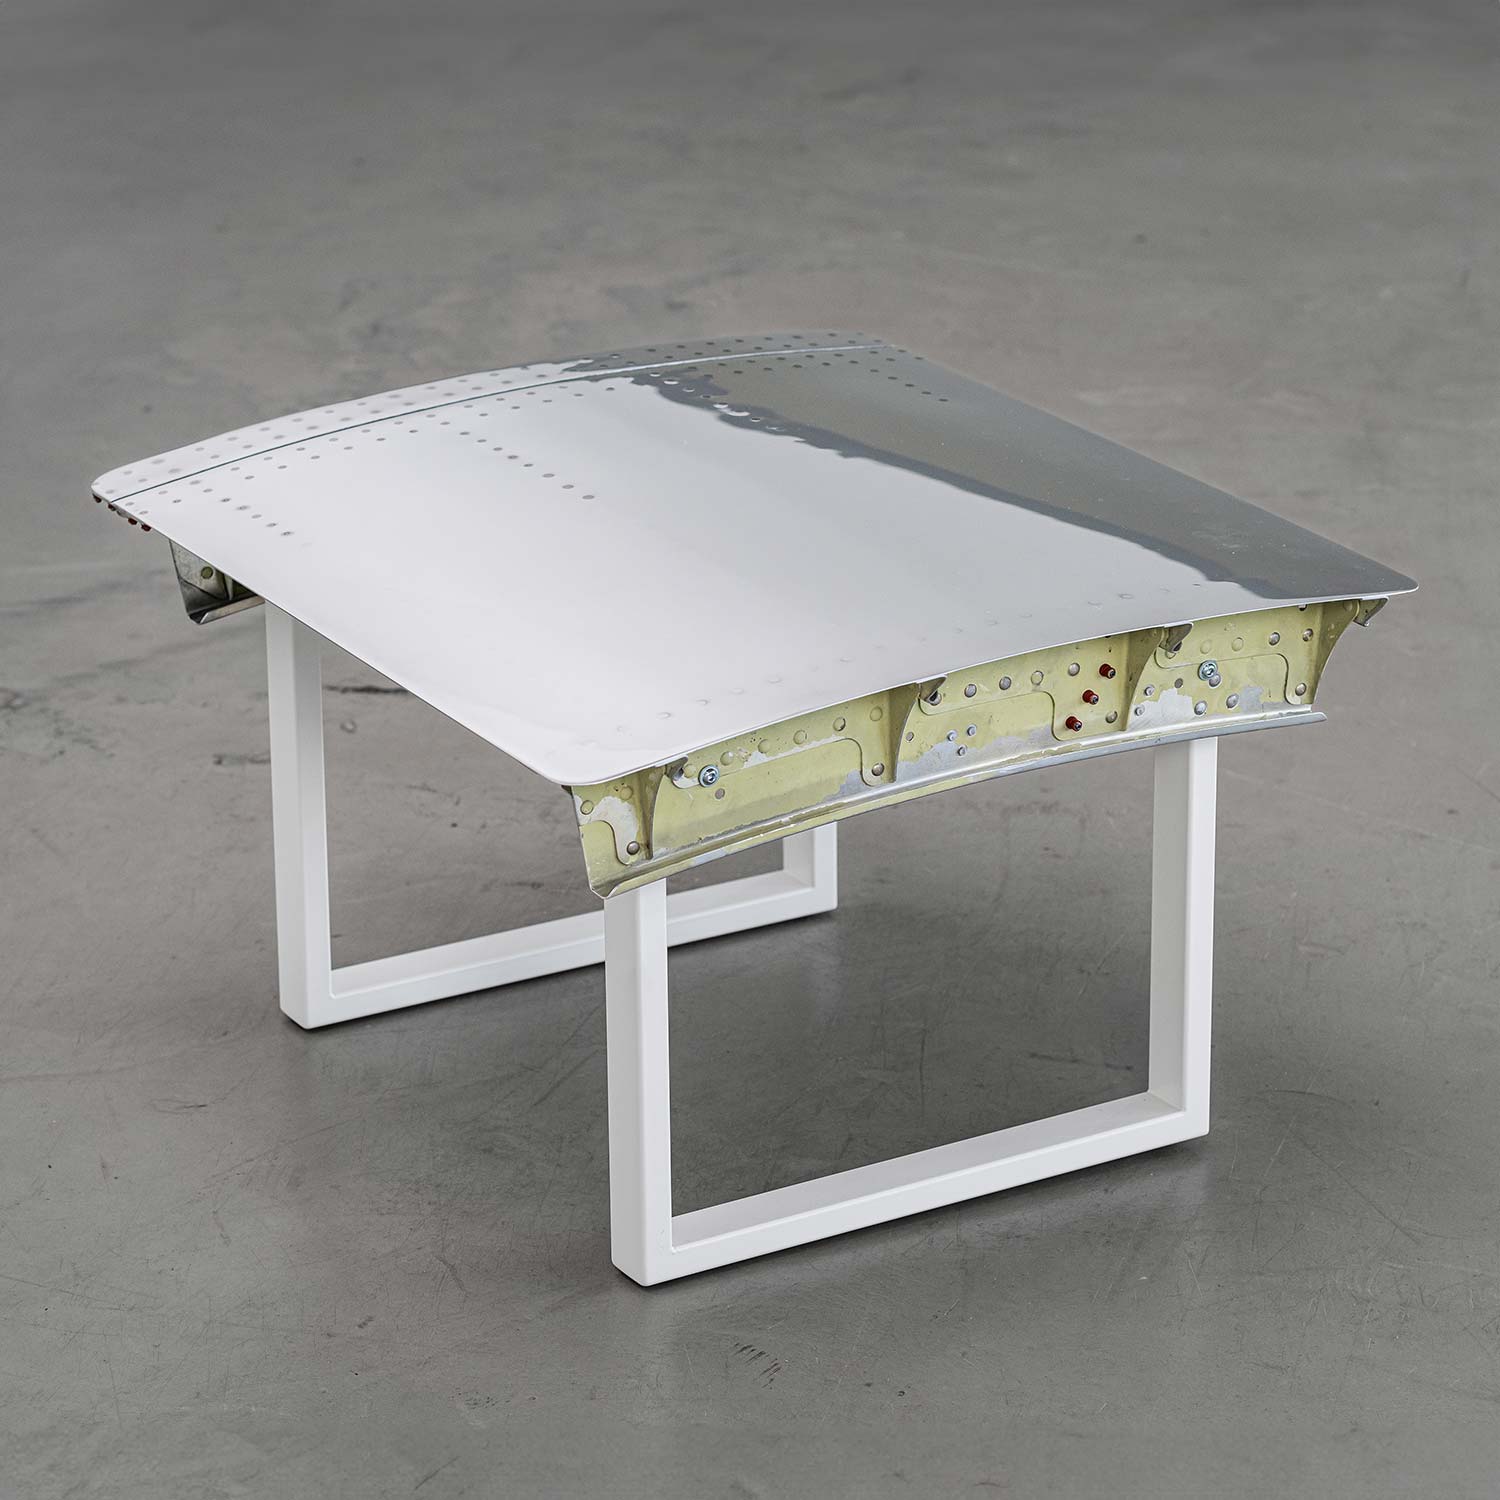 Side Table from Aircraft Parts, High-Gloss Polished, Frame: White RAL 9010, approx. 62 x 59 cm